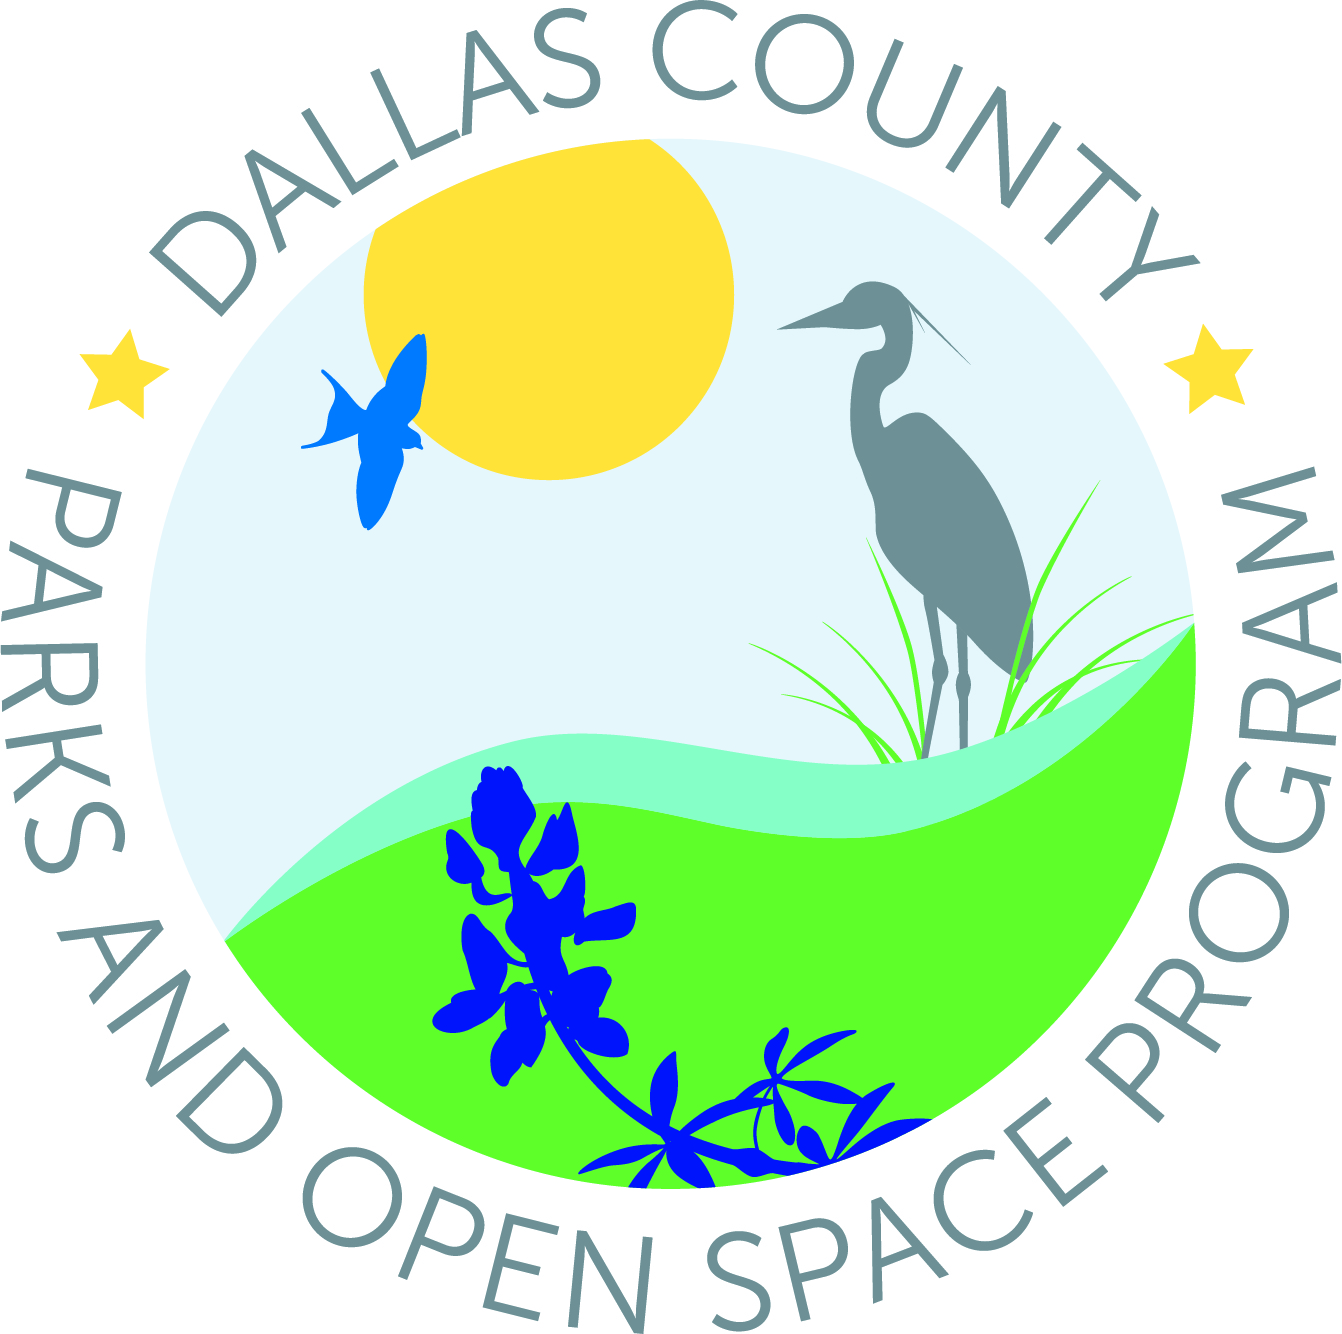 Meet in Coppell - Help Make Dallas County Open Spaces 10 year Strategy